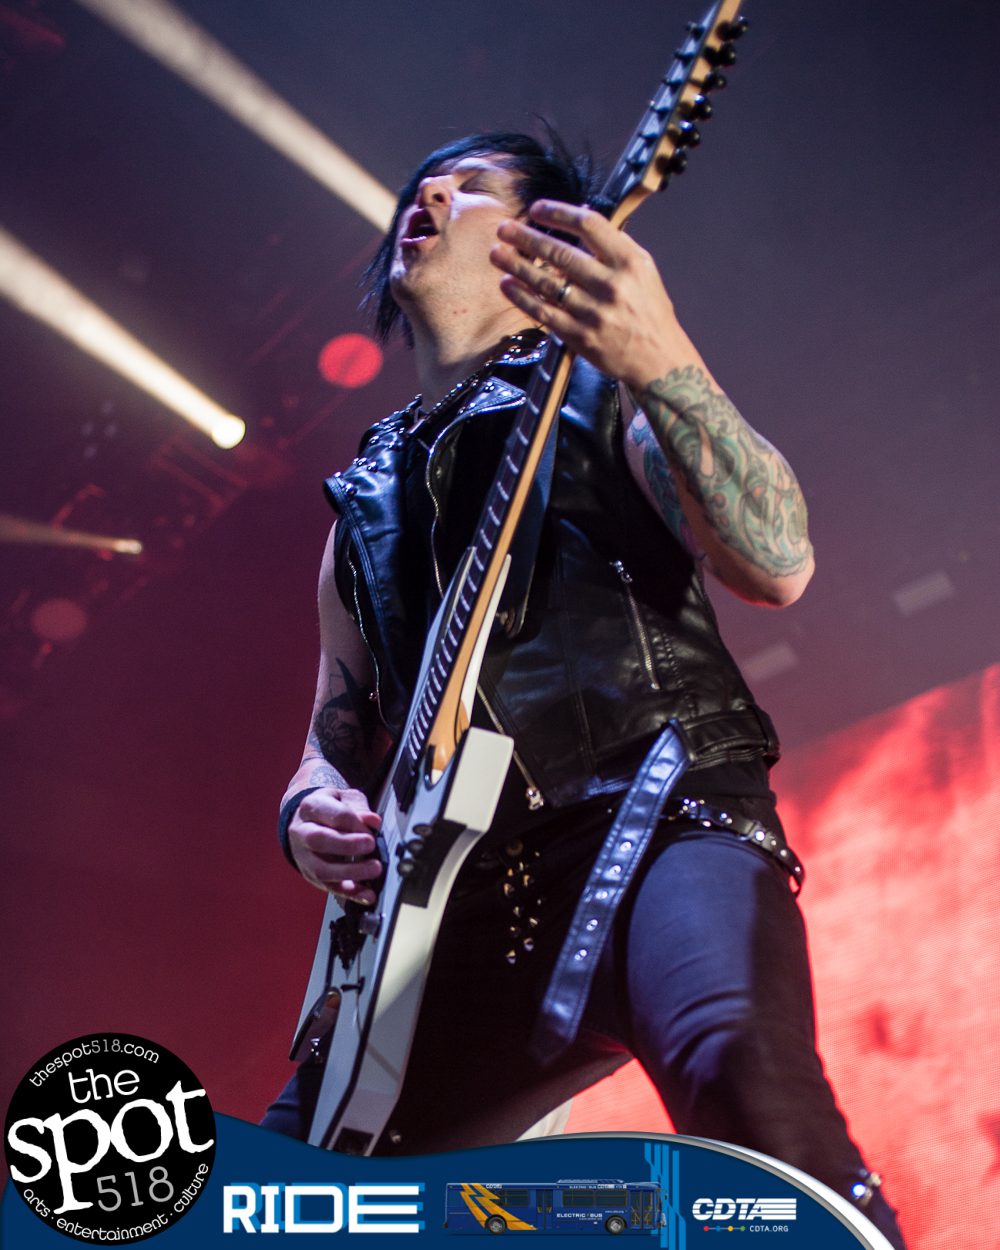 Black Veil Brides performing at Albany's MVP Arena during a stop of the Trinity of Terror tour on Friday, Nov. 18. Photo by Michael Hallisey / The Spot 518